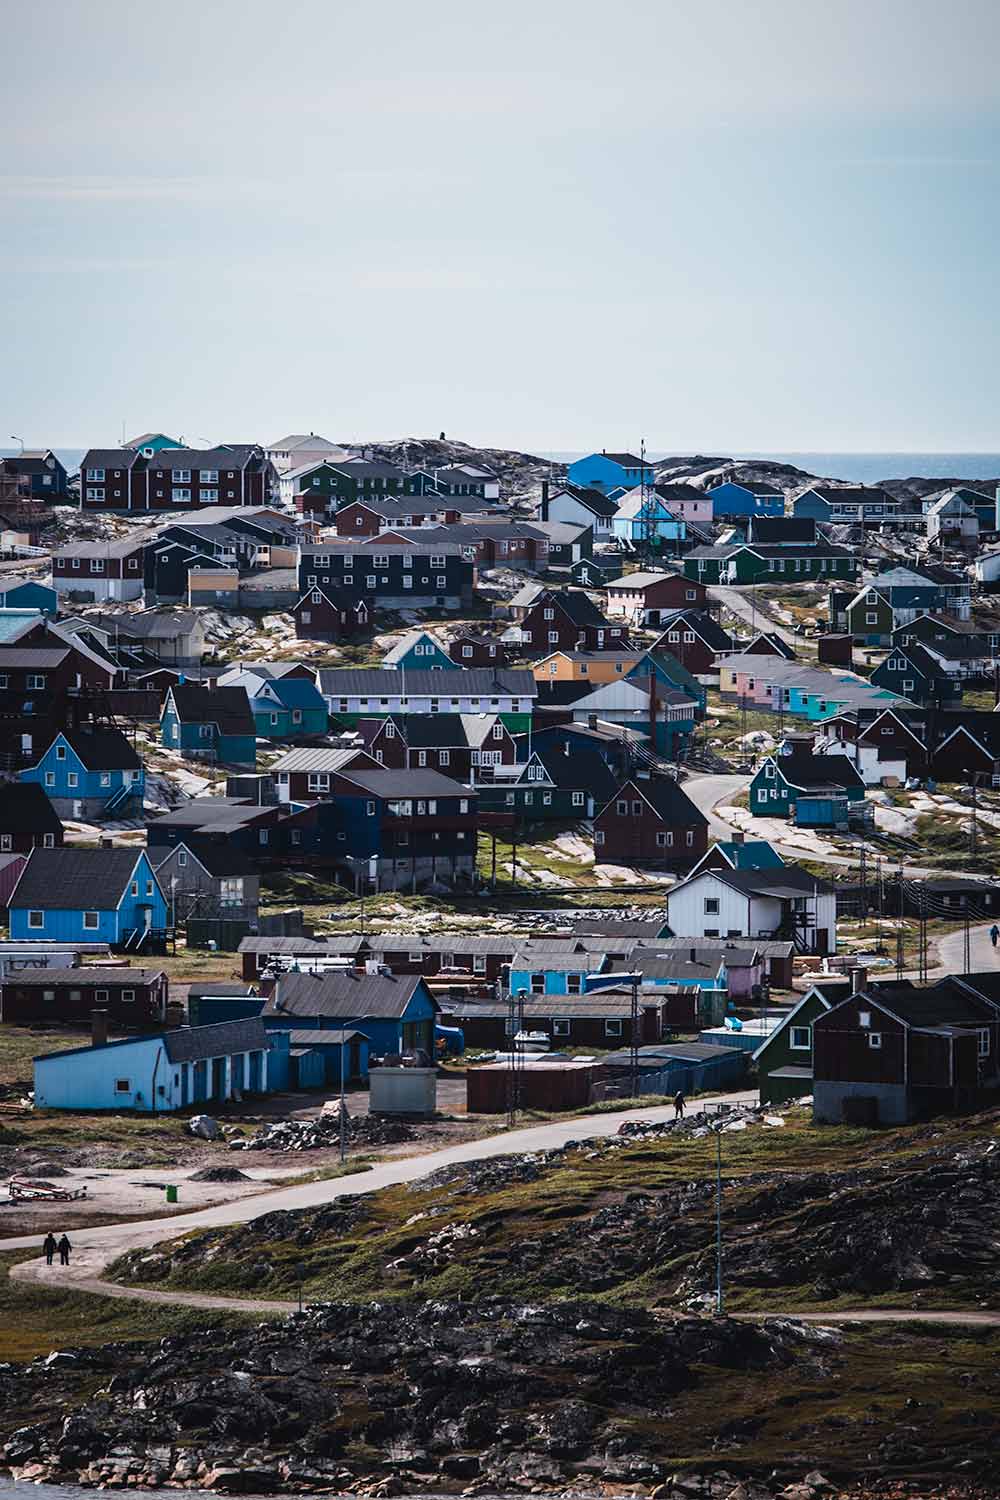 Vibrantly colored houses in Qeqertarsuaq, each hue revealing a historical significance